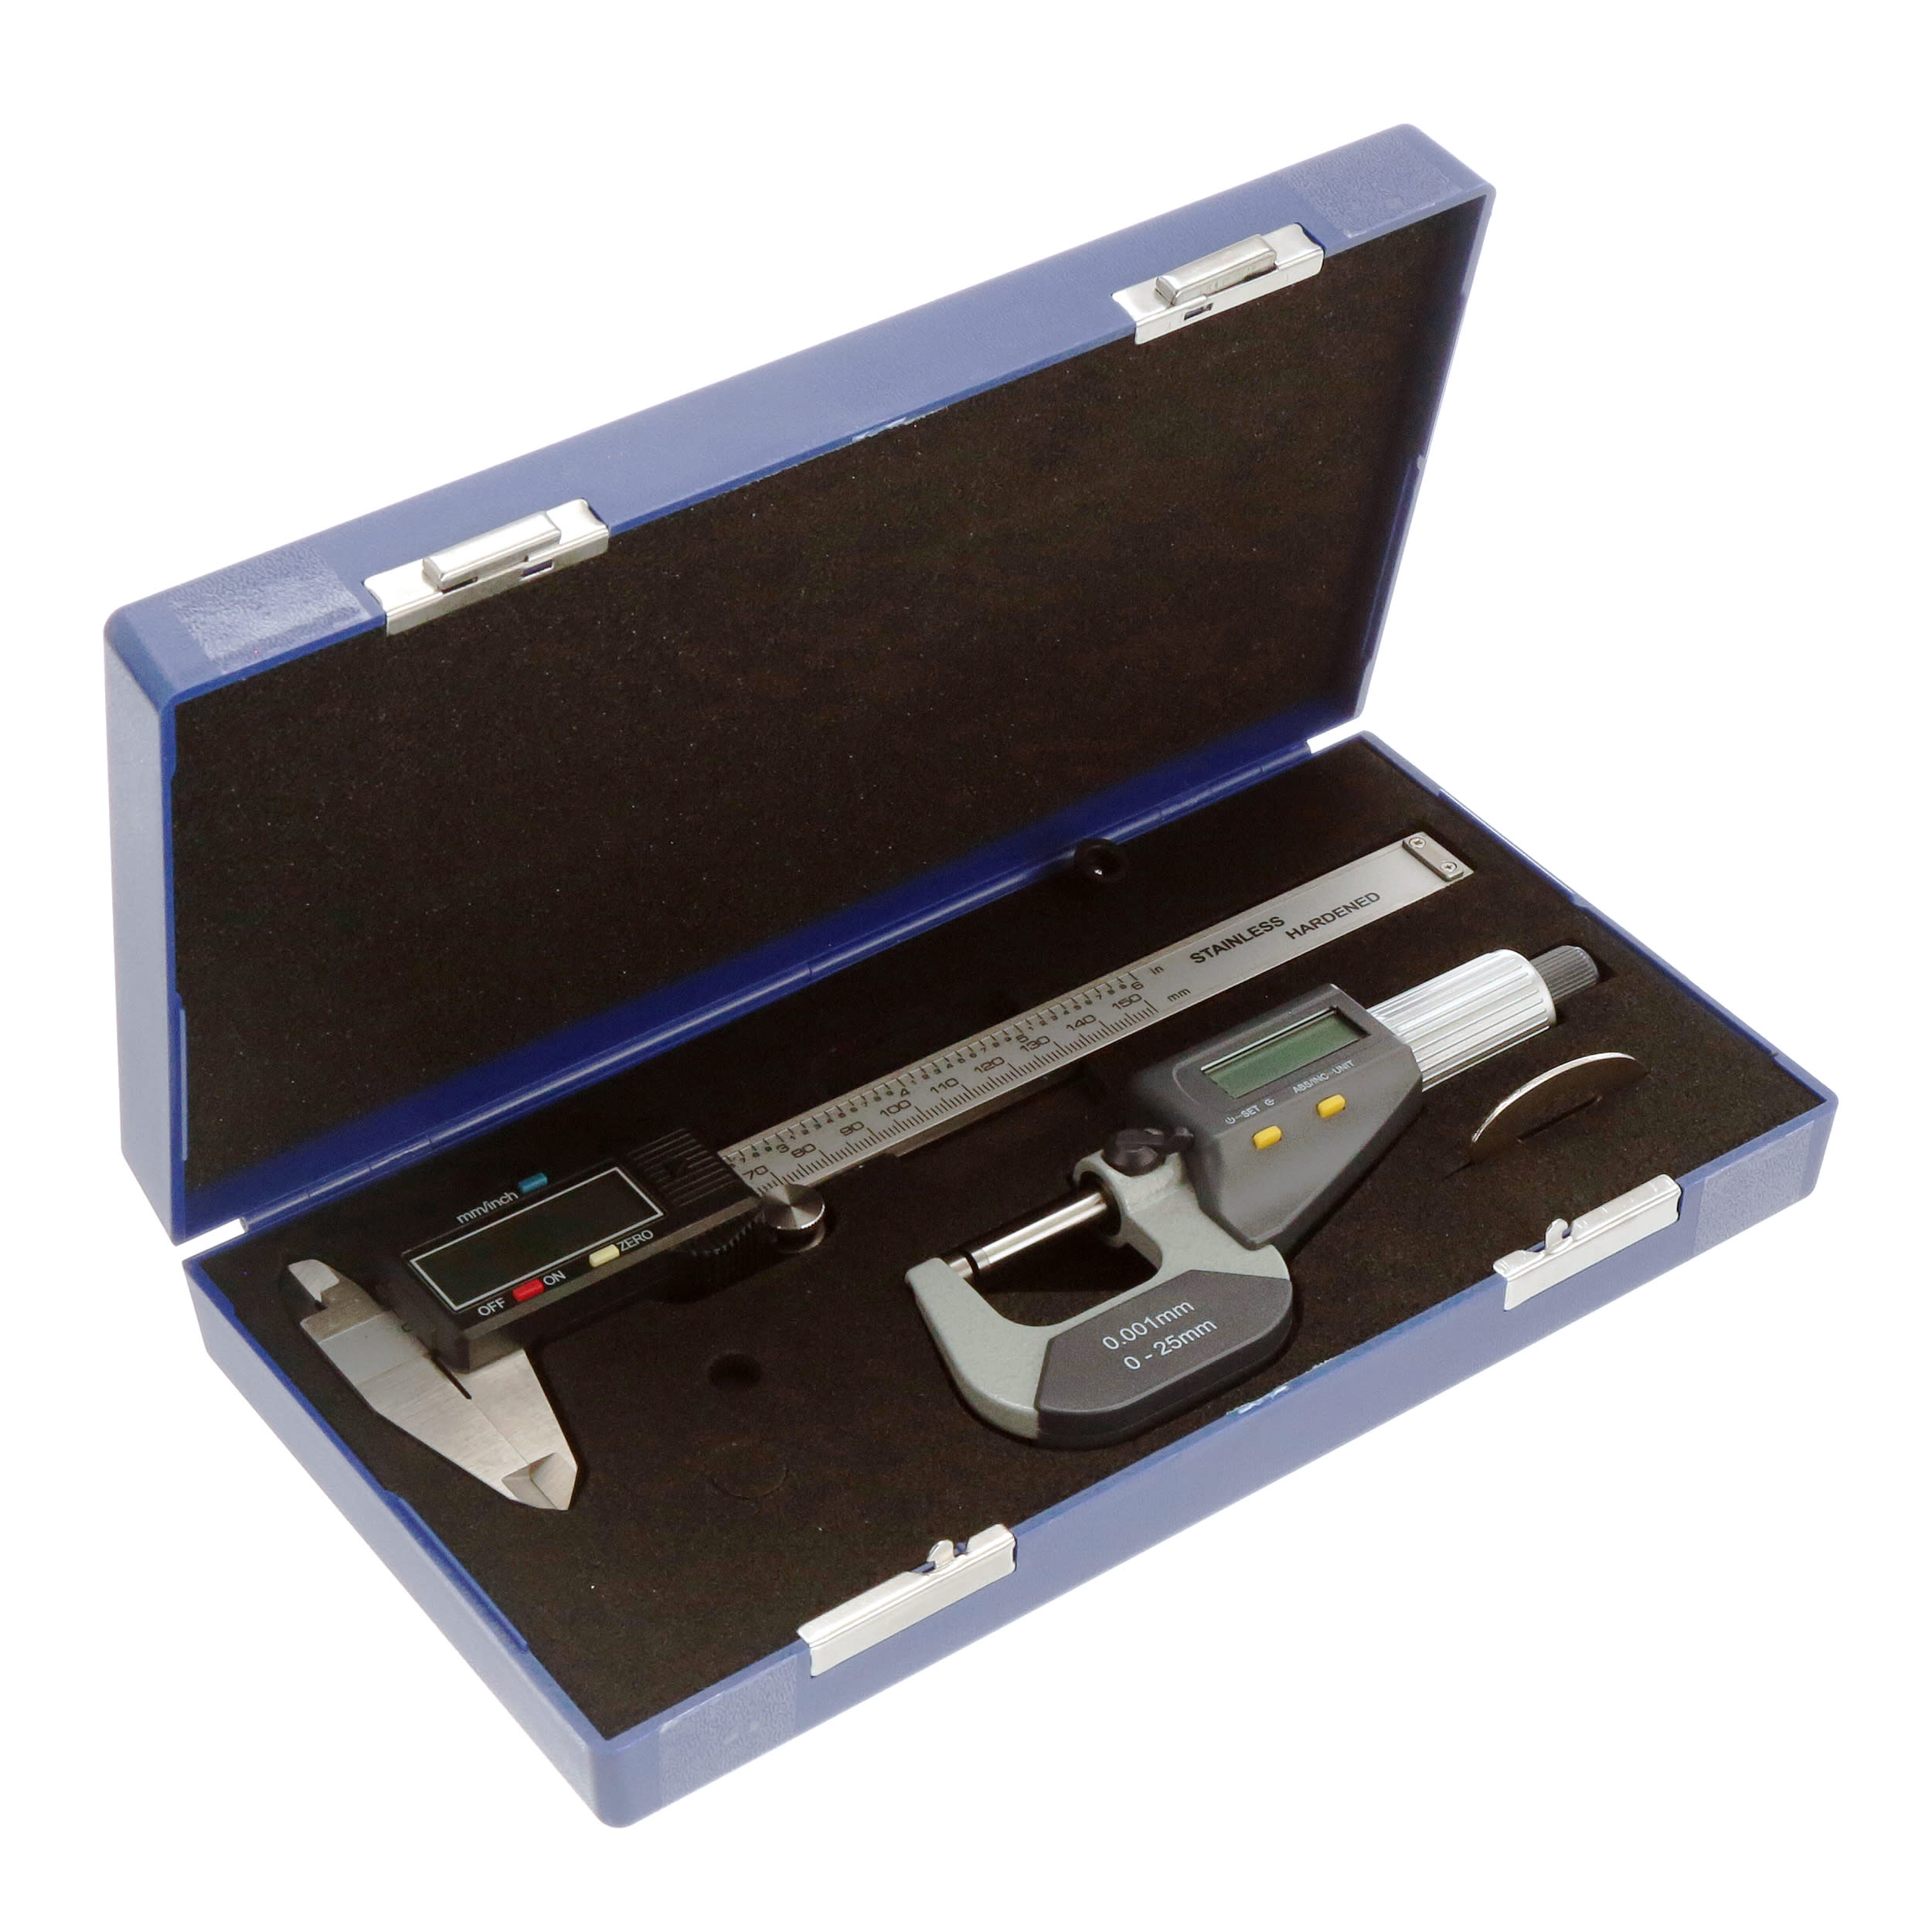 RS by - 4430449 - Caliper & Micrometer Set Metric & Imperial Steel Max 25mm/150mm - Allied Electronics & Automation